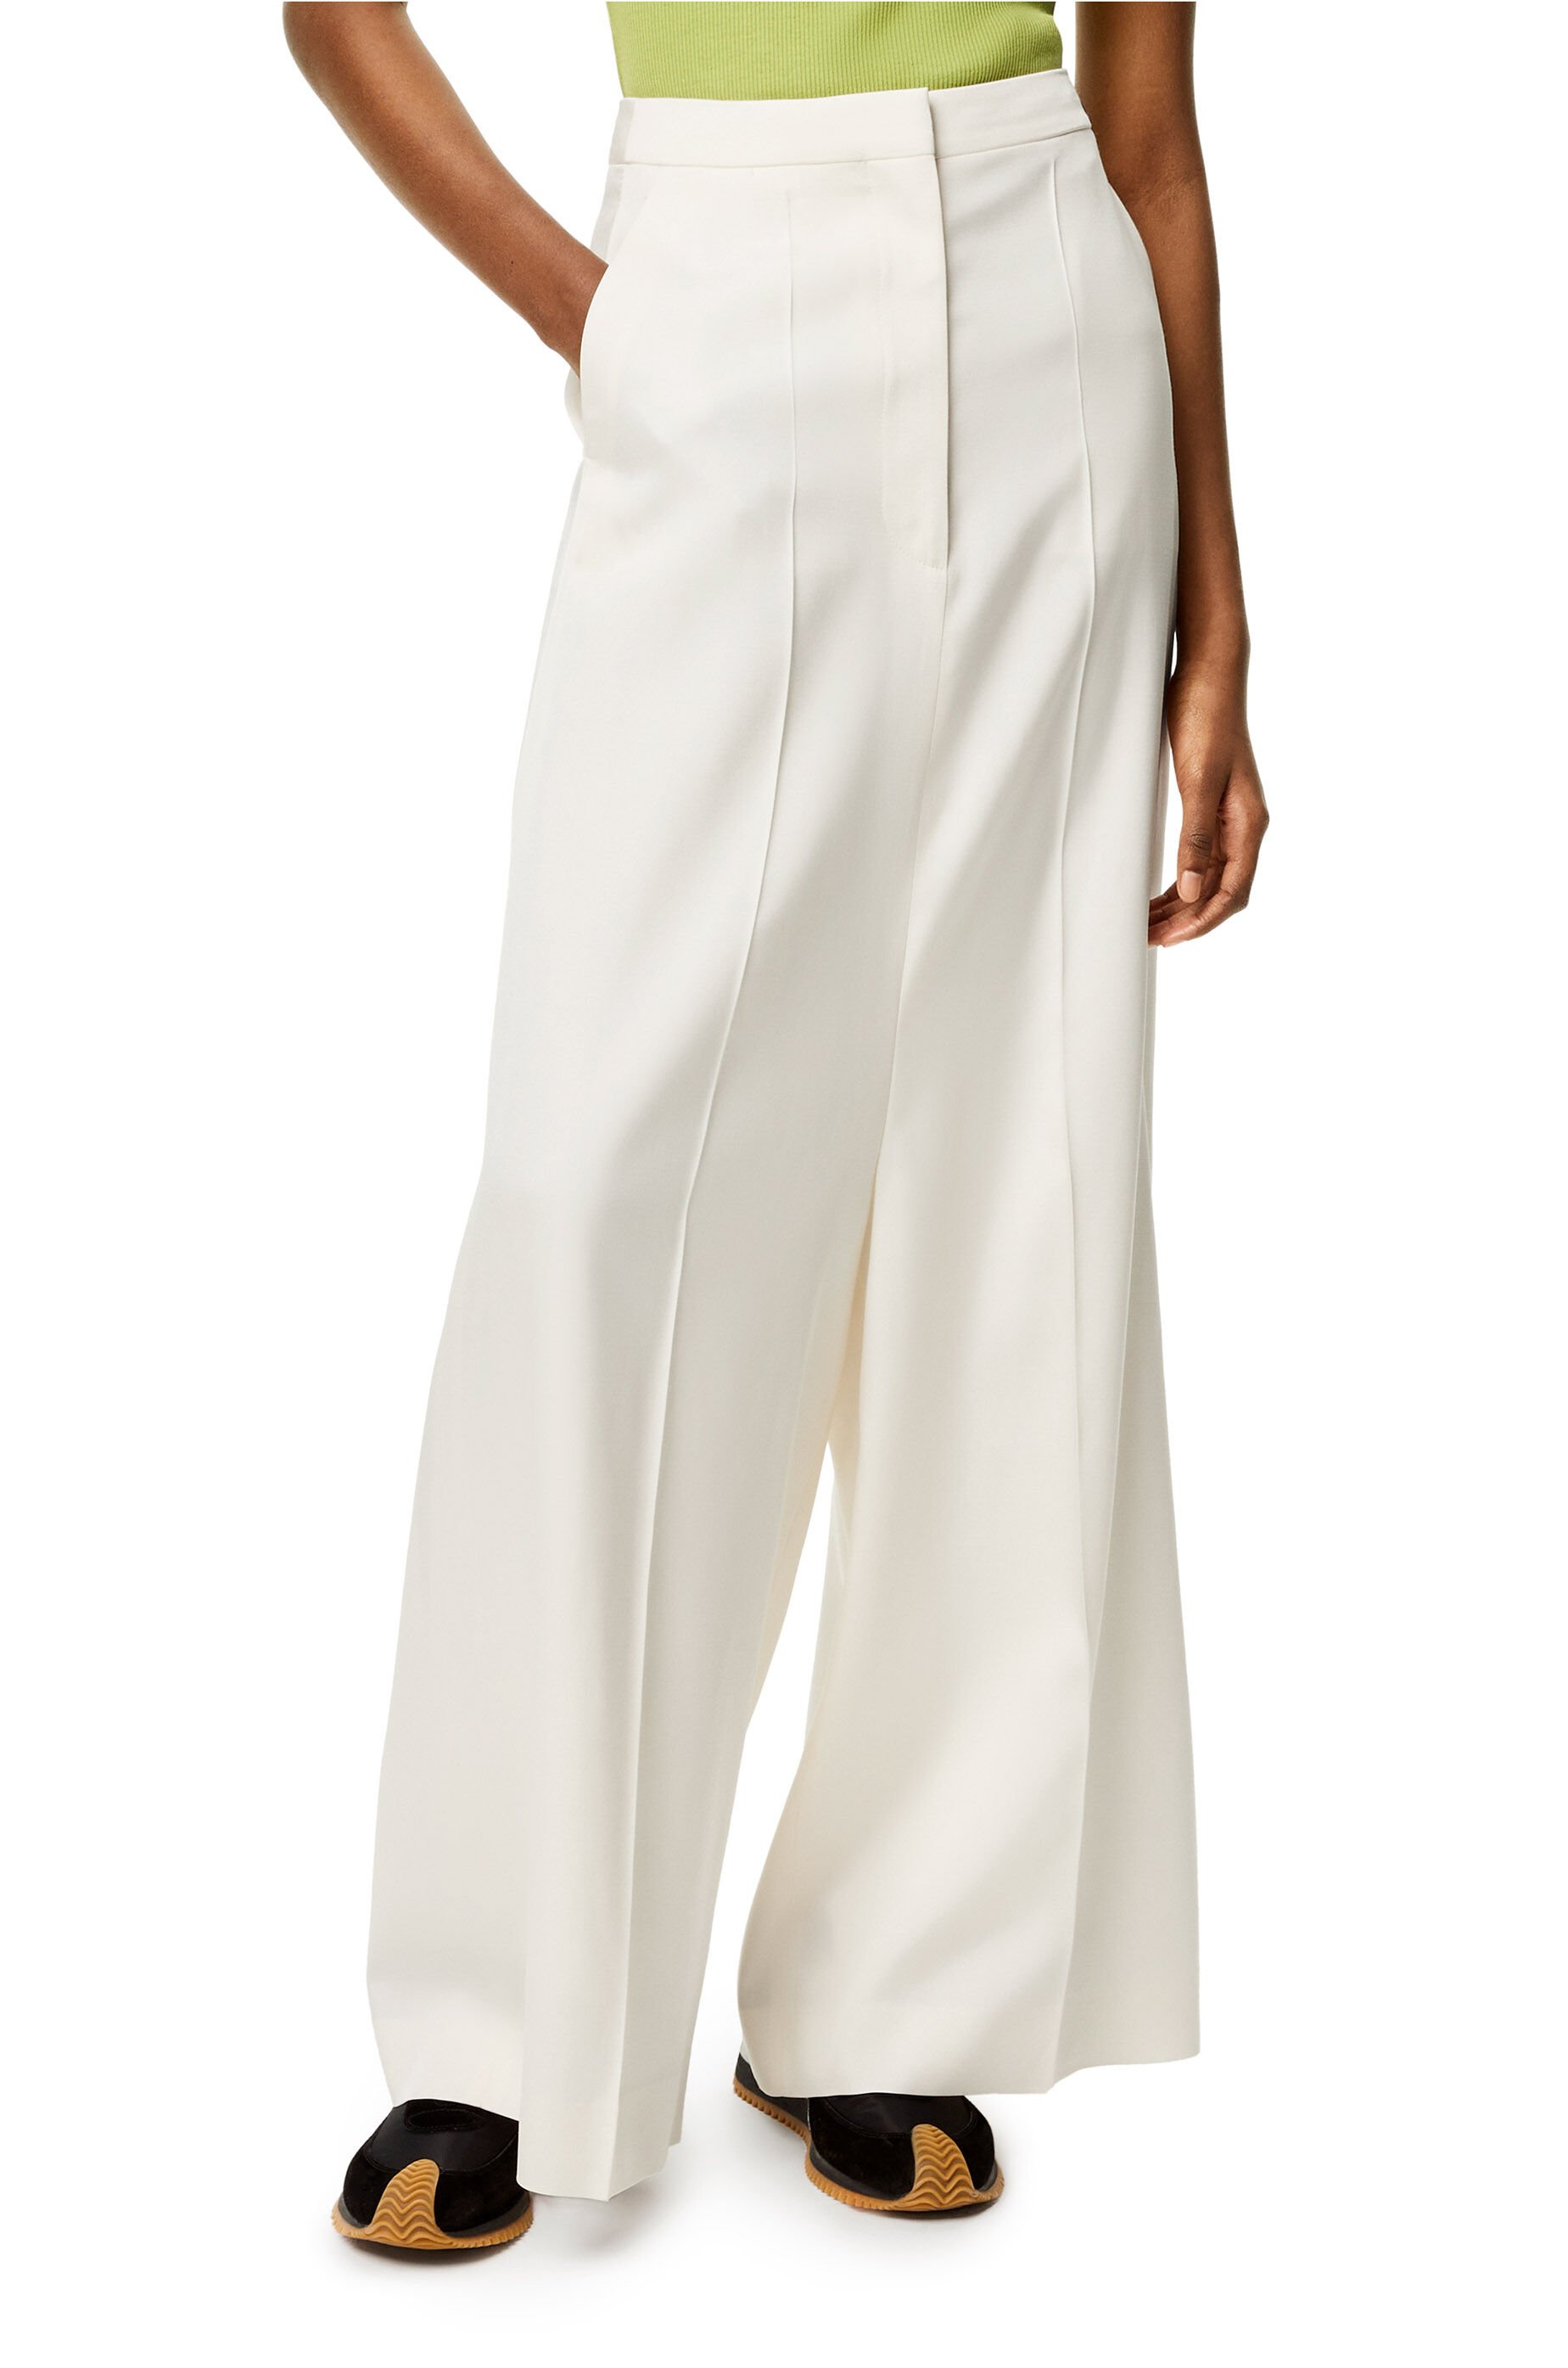 Luxury Tailored trousers in wool and silk for Women LOEWE Women Clothing Pants Formal Pants 